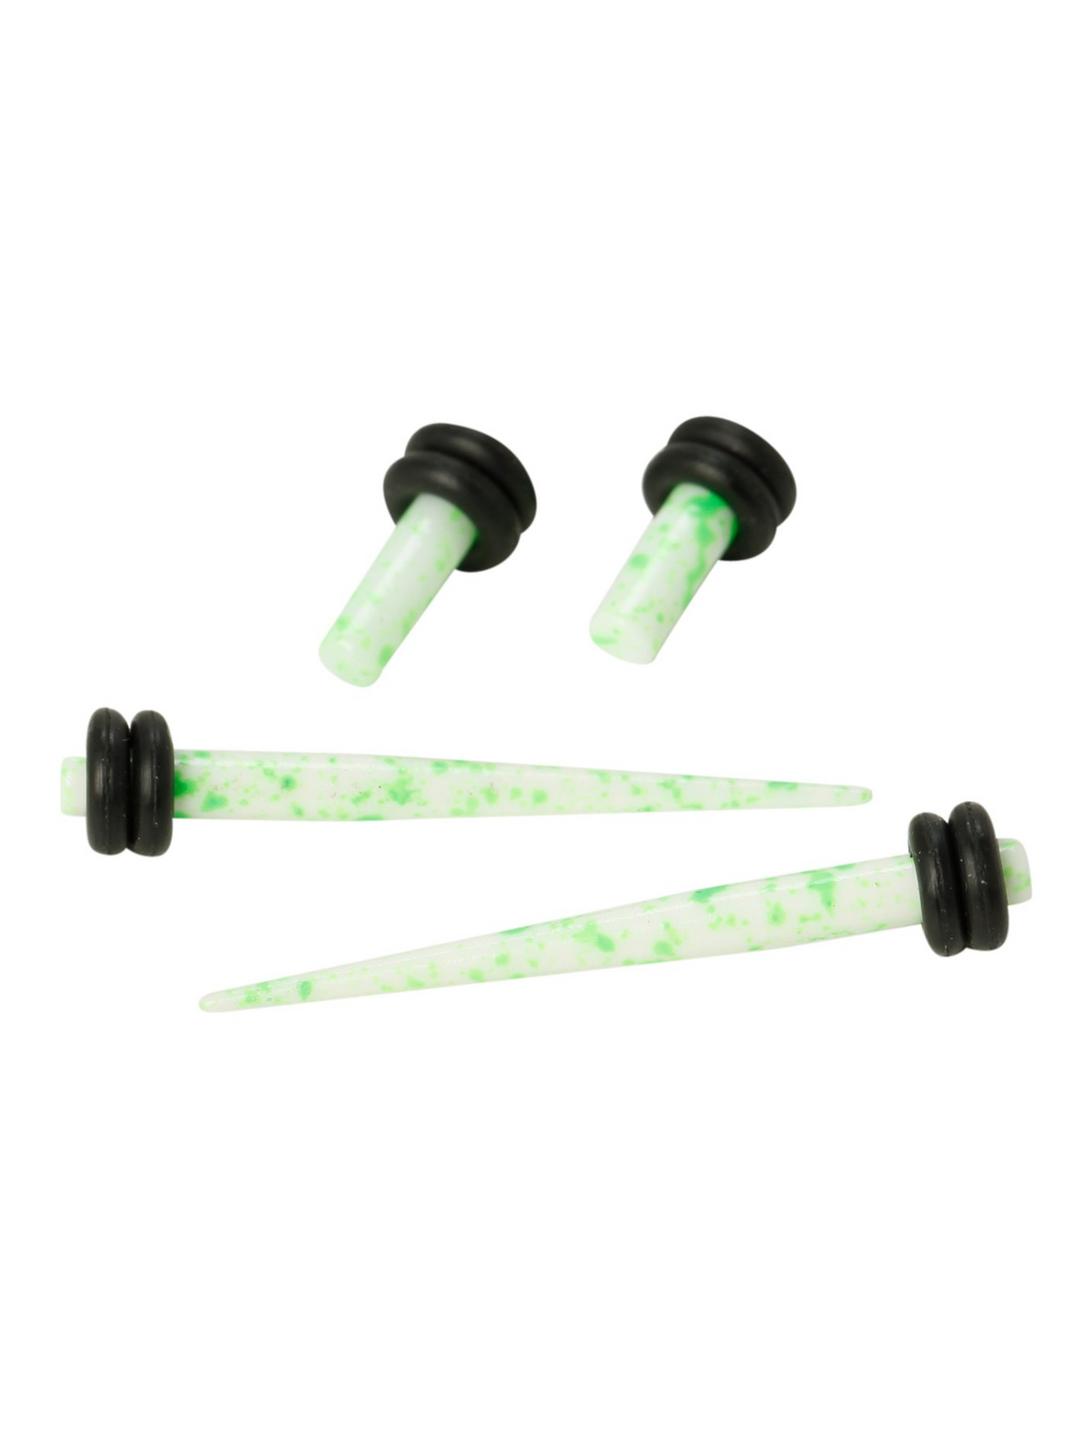 Acrylic White Neon Green Splatter Micro Taper And Plug 4 Pack, LIGHT GREEN, hi-res